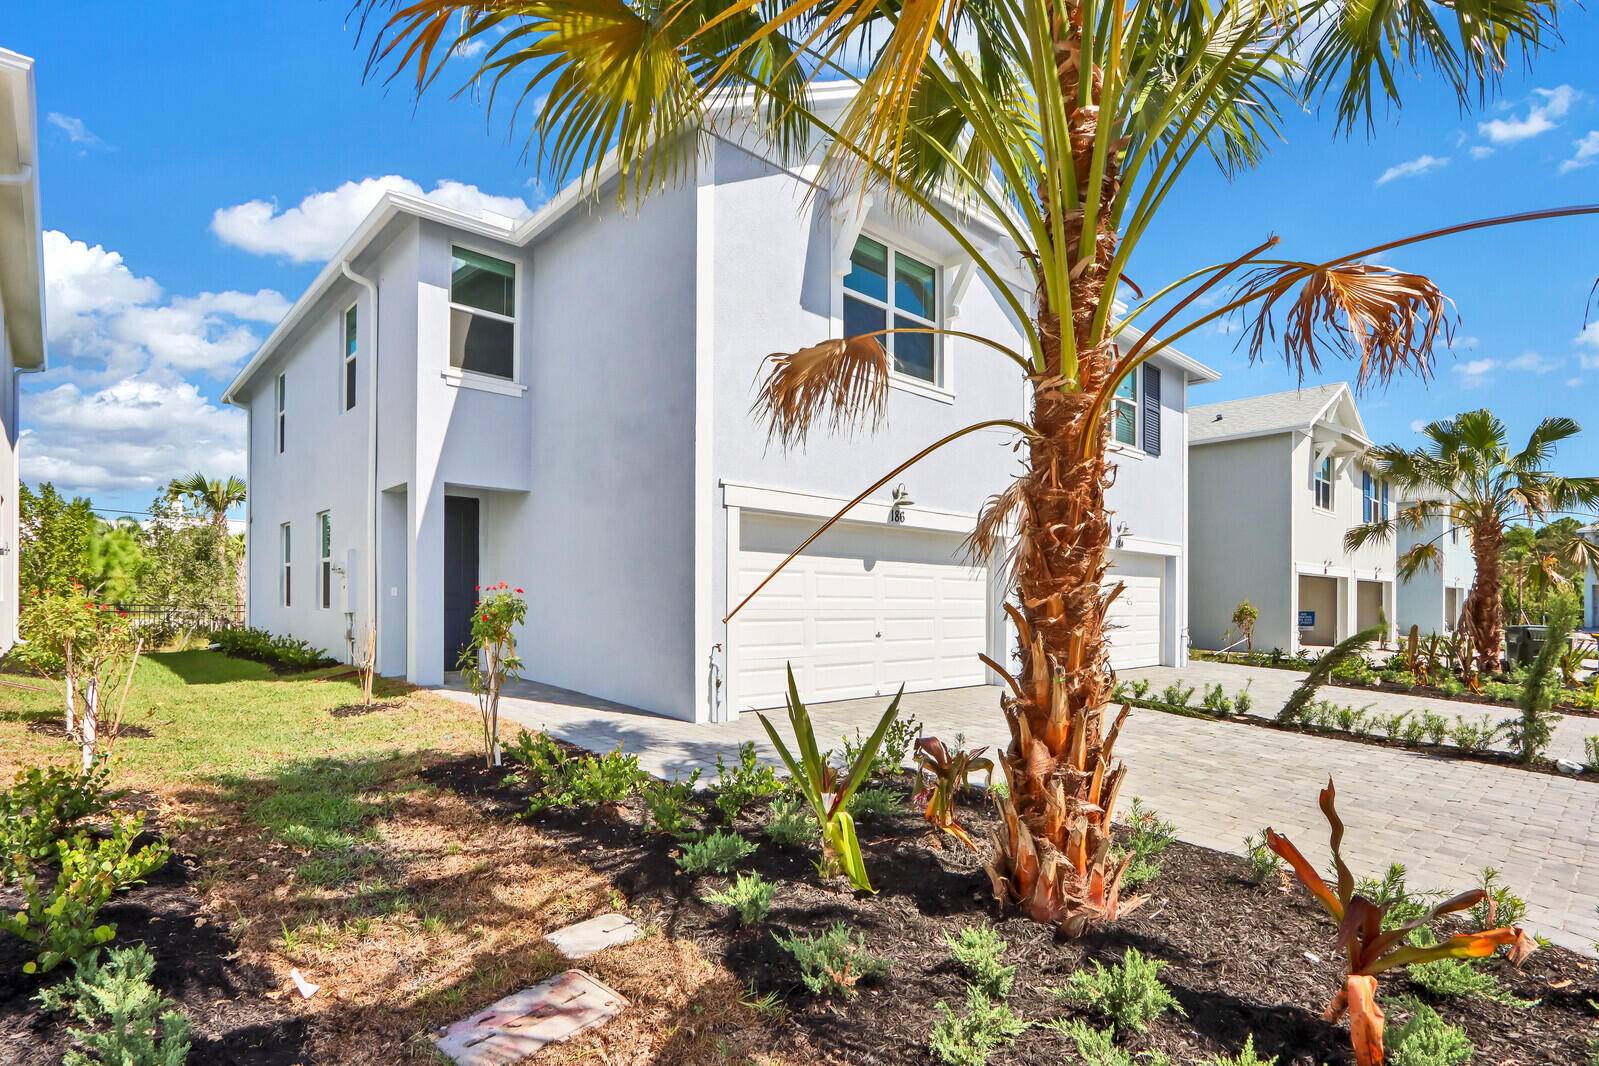 Welcome home to this freshly constructed, energy efficient townhome nestled in the vibrant heart of Jensen Beach.